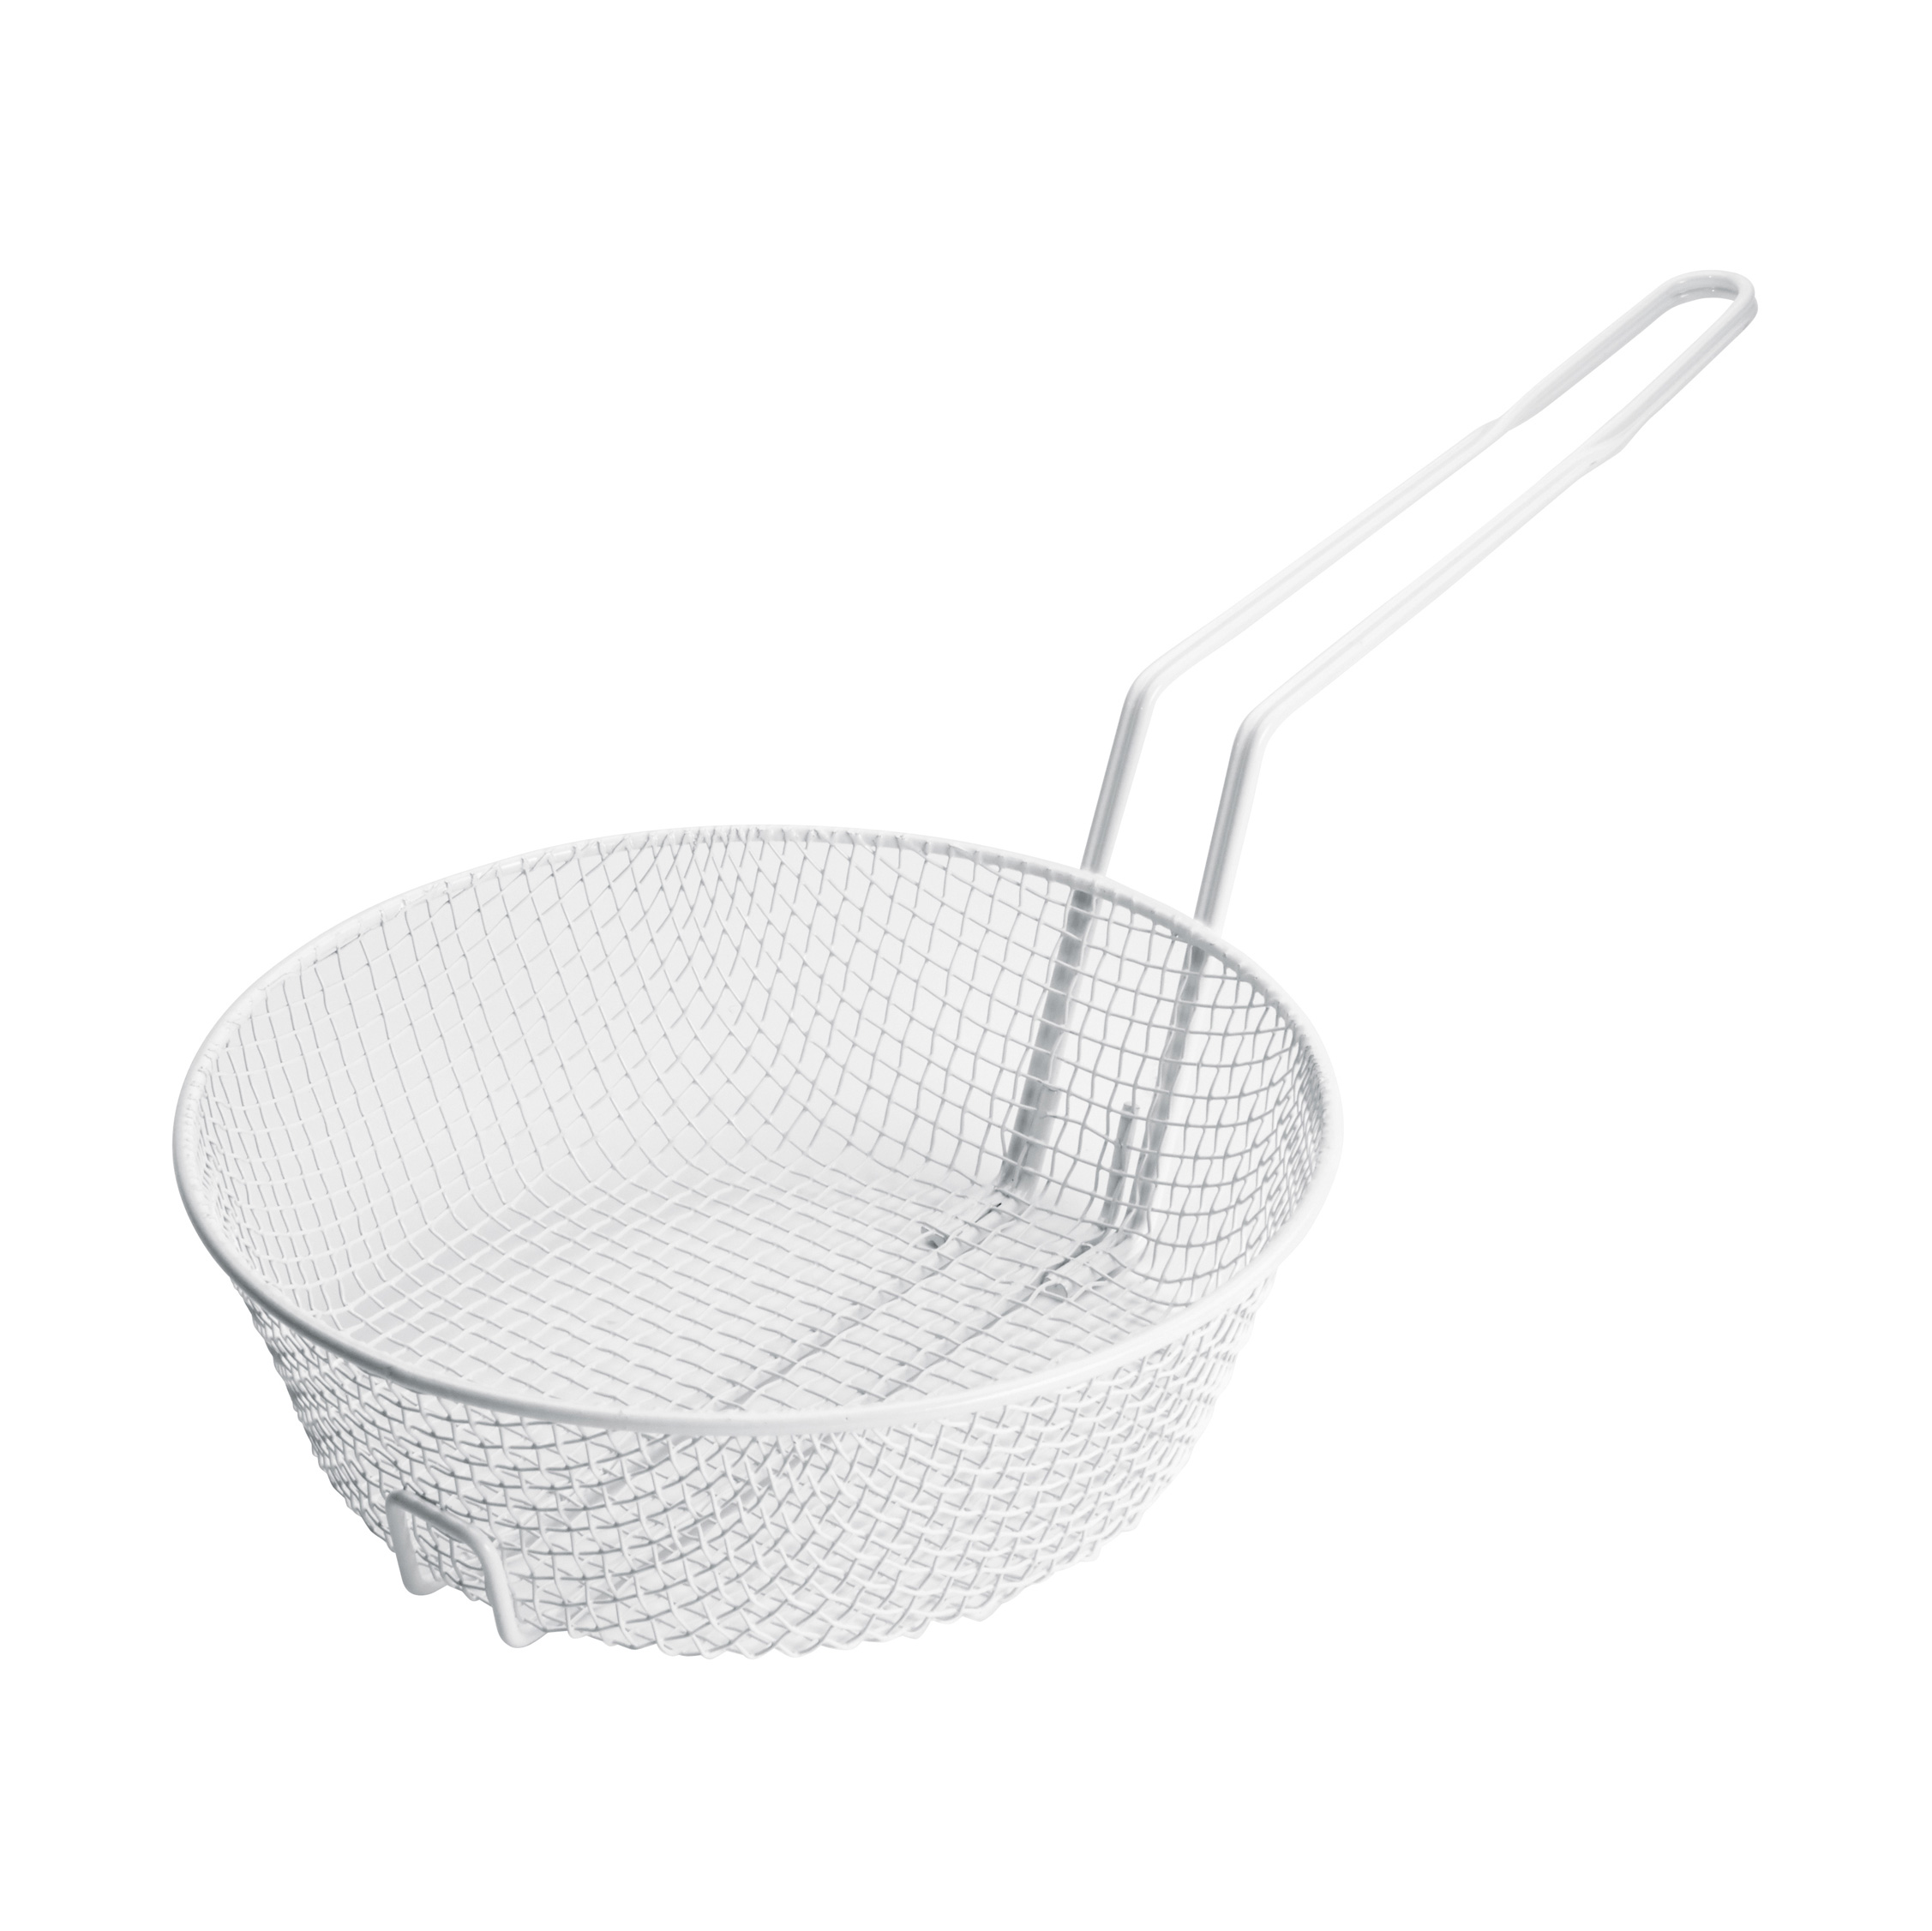 10&quot; MEDIUM MESH CULINARY
BASKET, 3&quot; DEEP, NICKEL
PLATED STEEL WIRE, EACH,   
12/22